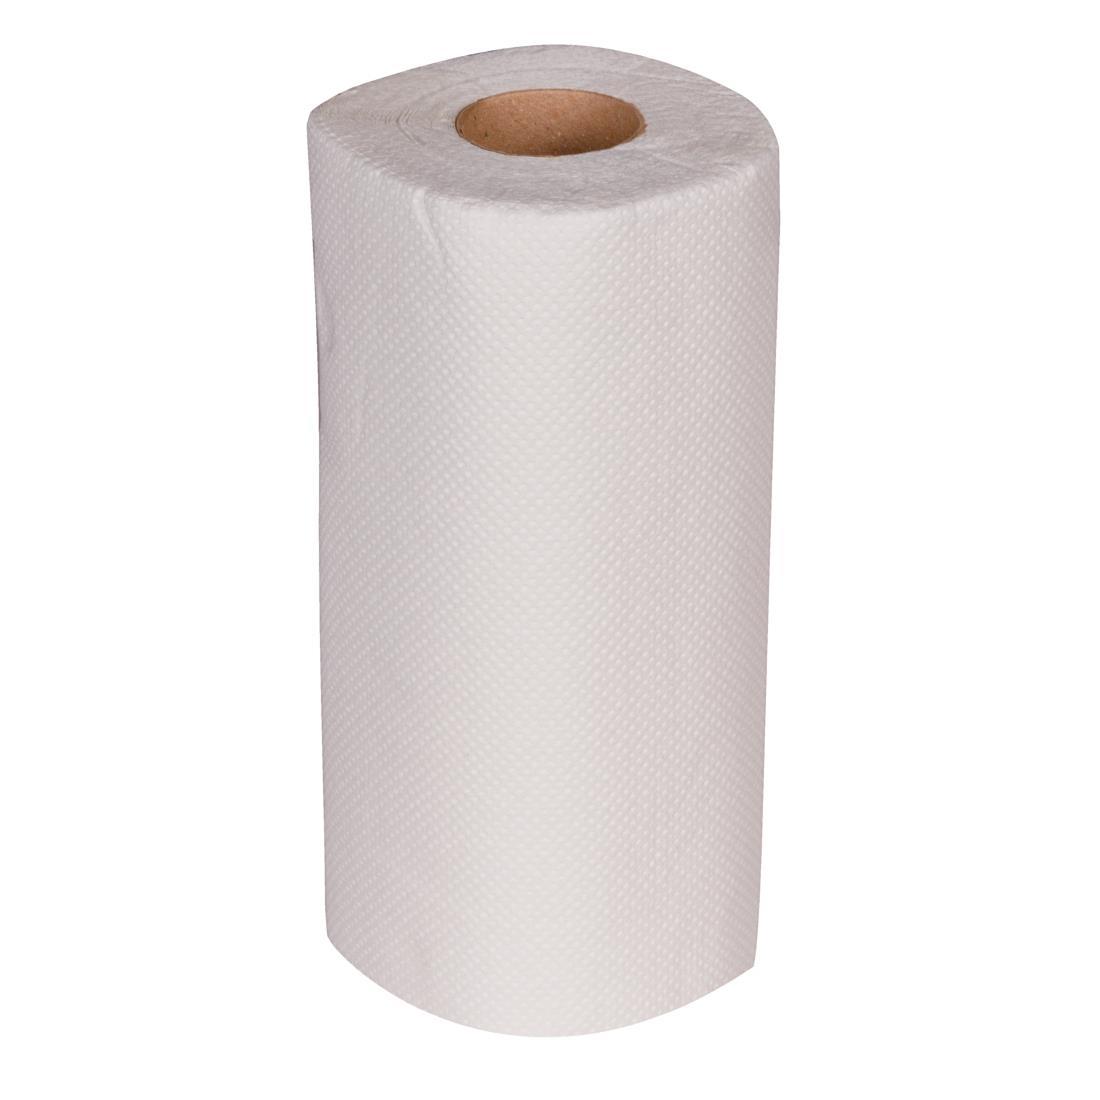 Jantex Kitchen Rolls White 2-Ply 11.5m (Pack of 24) - GH065  - 5